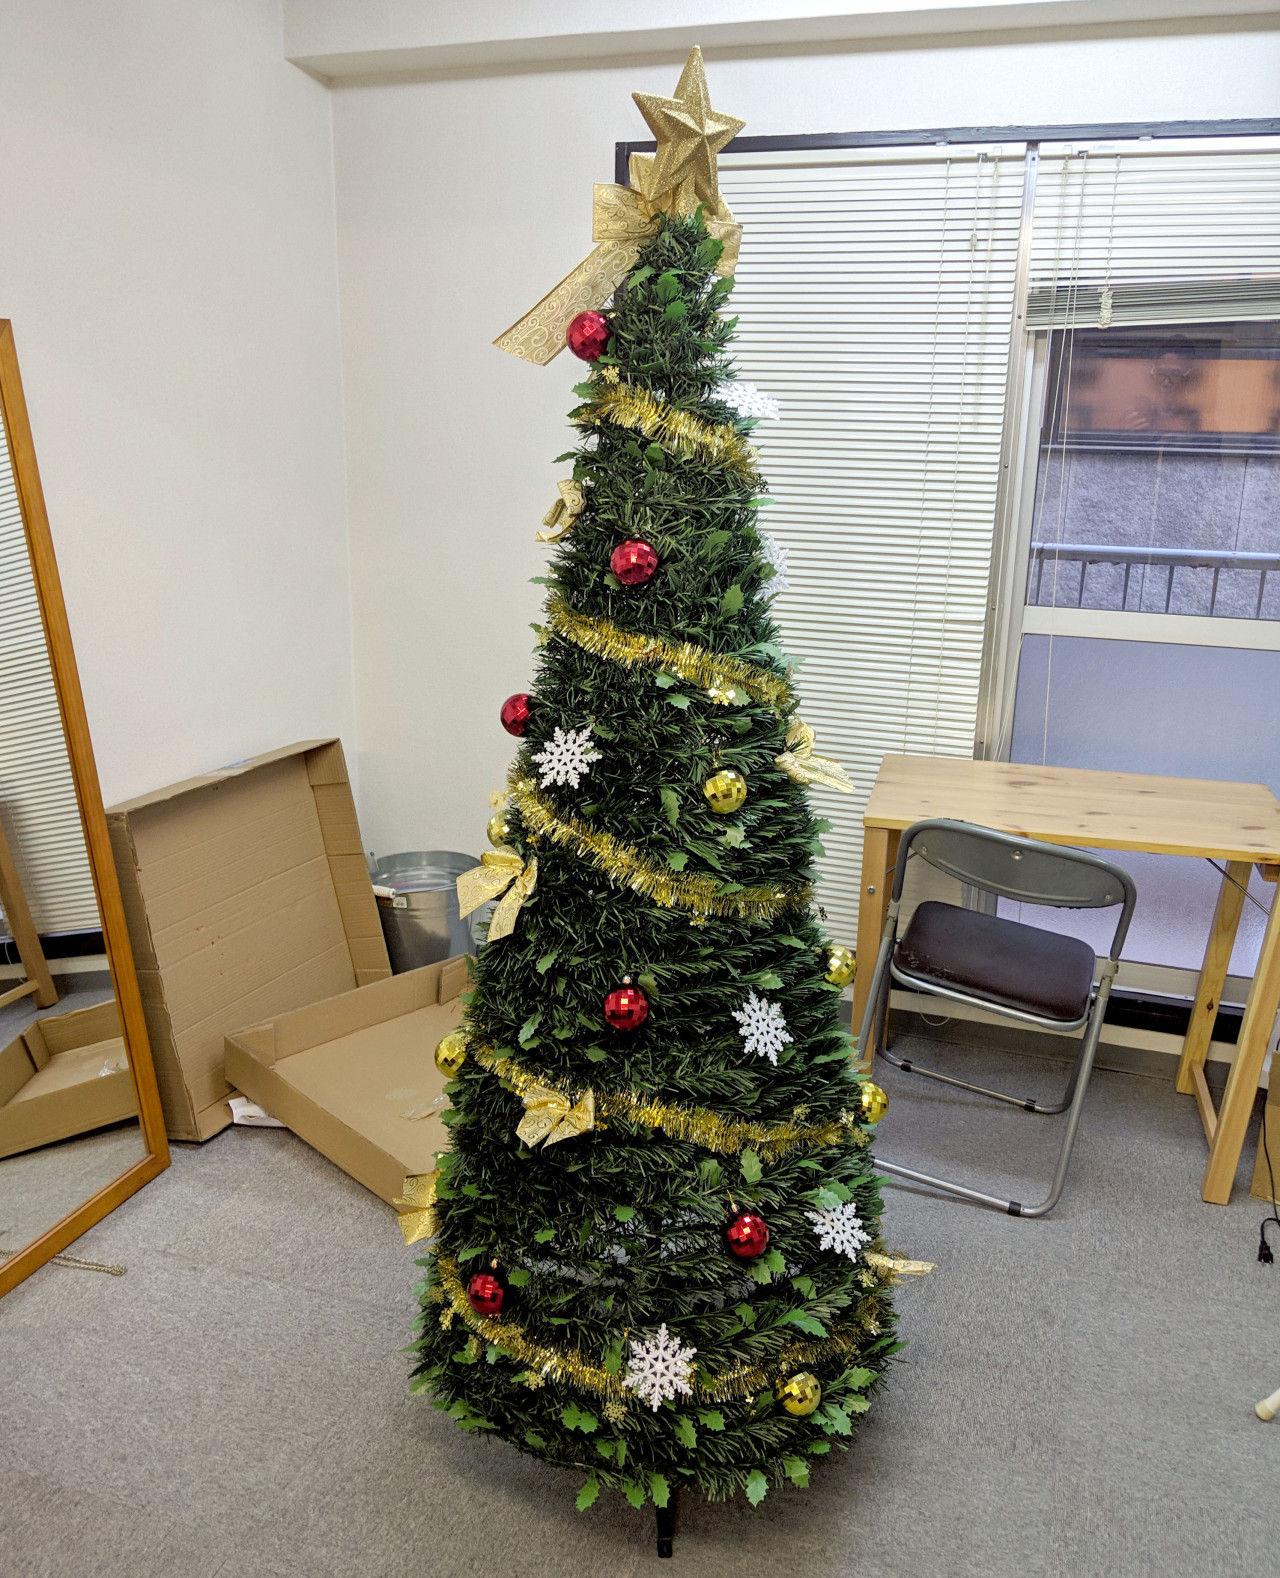 Mr Sato’s Xmas Challenge: Assemble a Christmas tree in 30 seconds ...